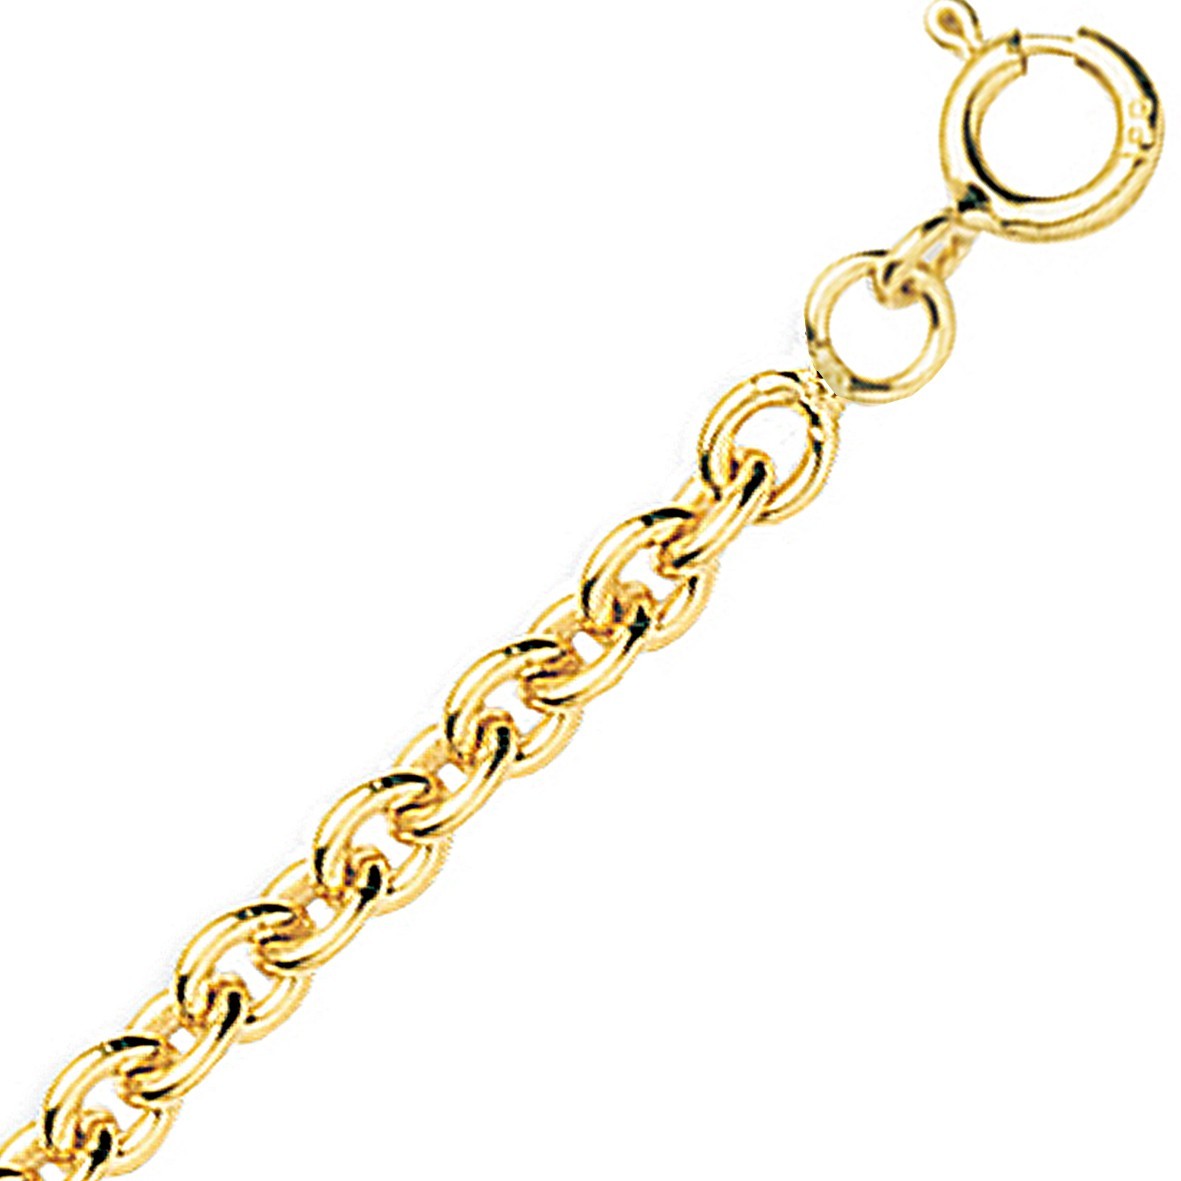 Chaine or jaune 18k maille forçat ronde 2.76mm